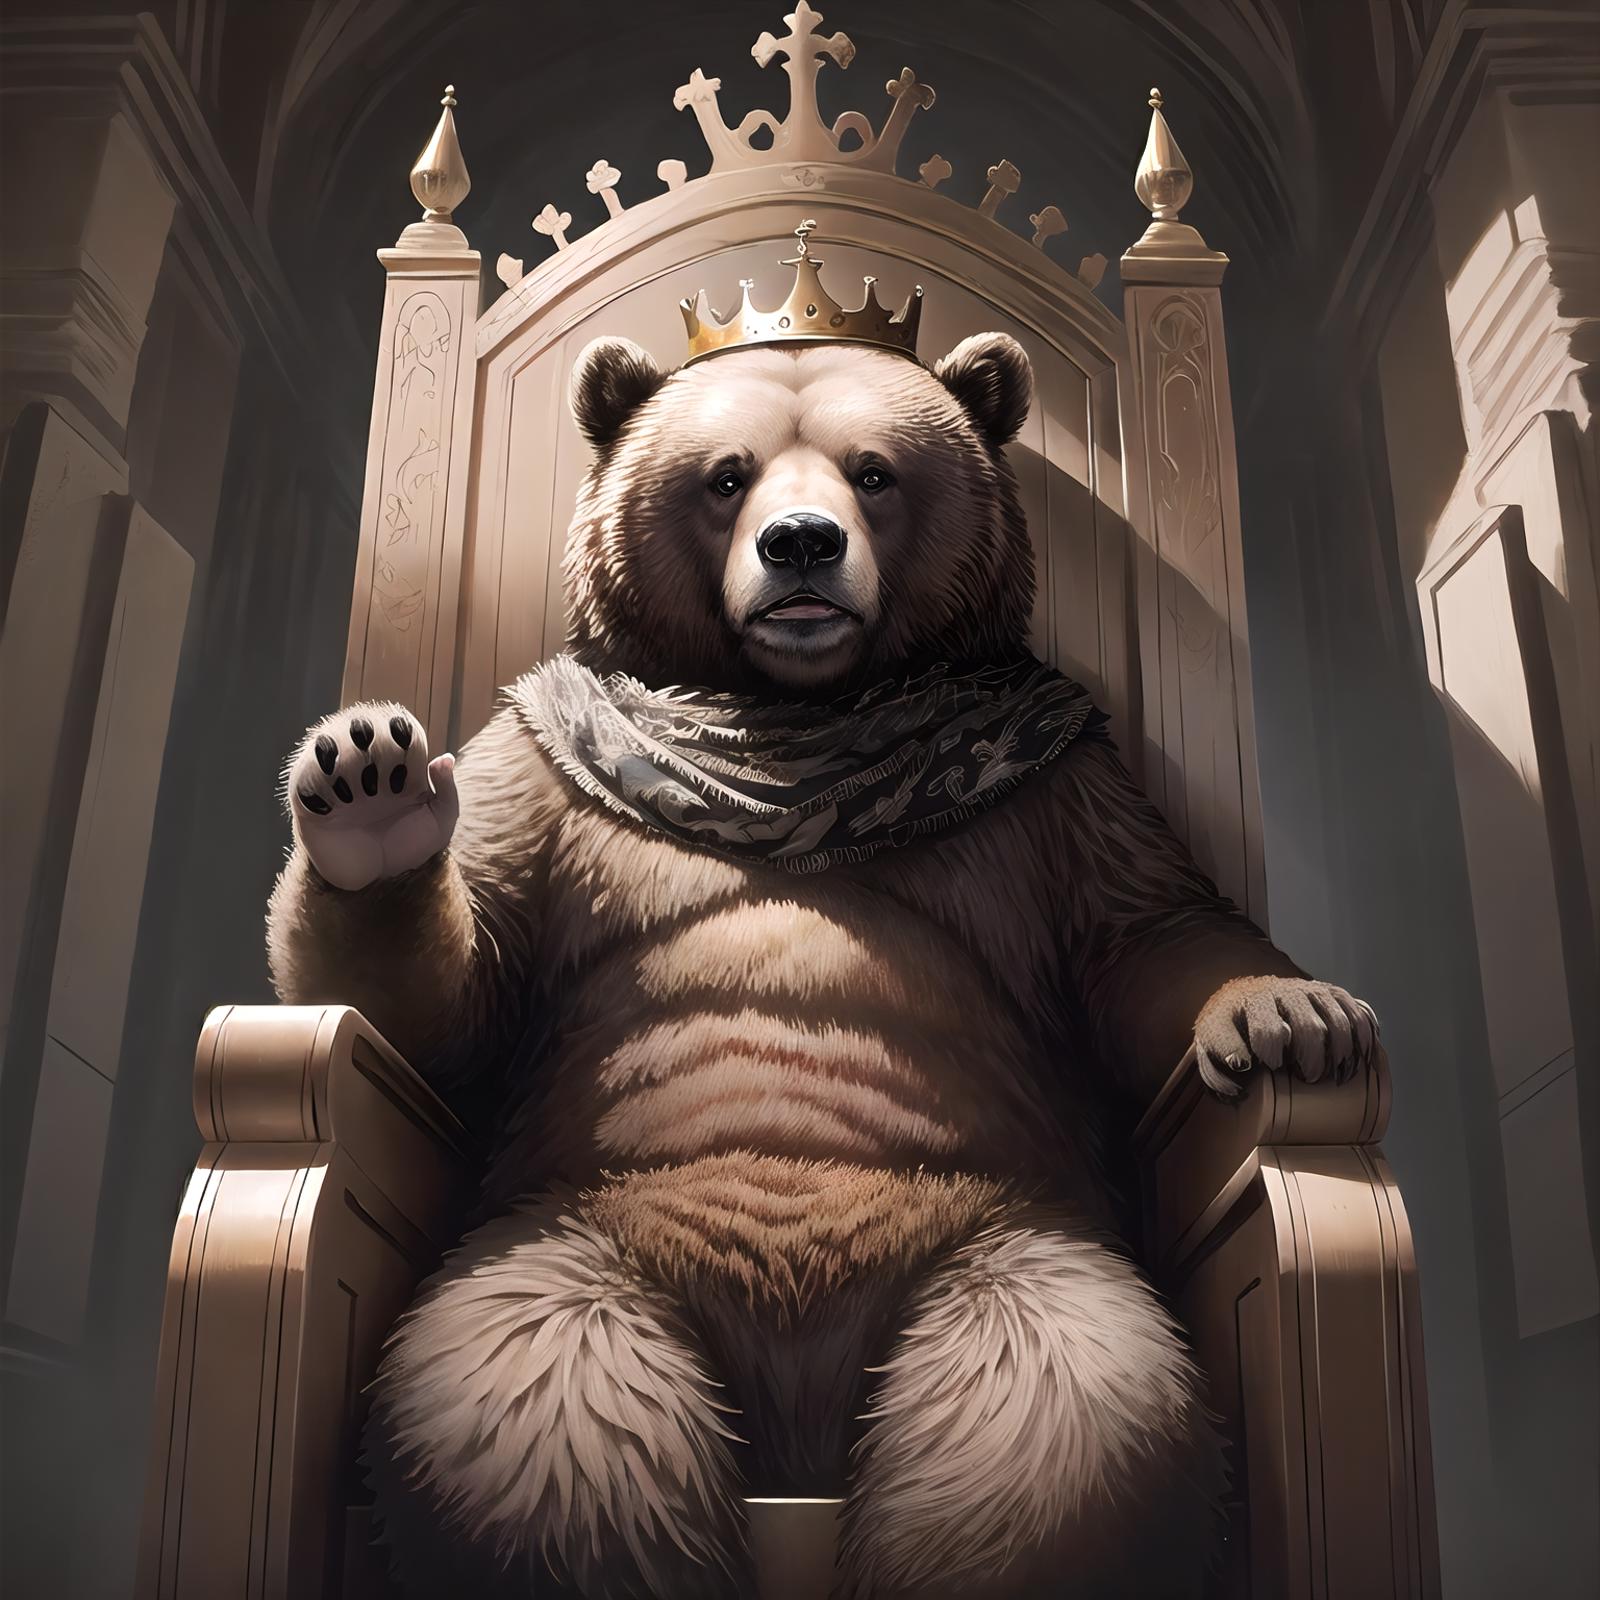 I am the king! image by MLGnom